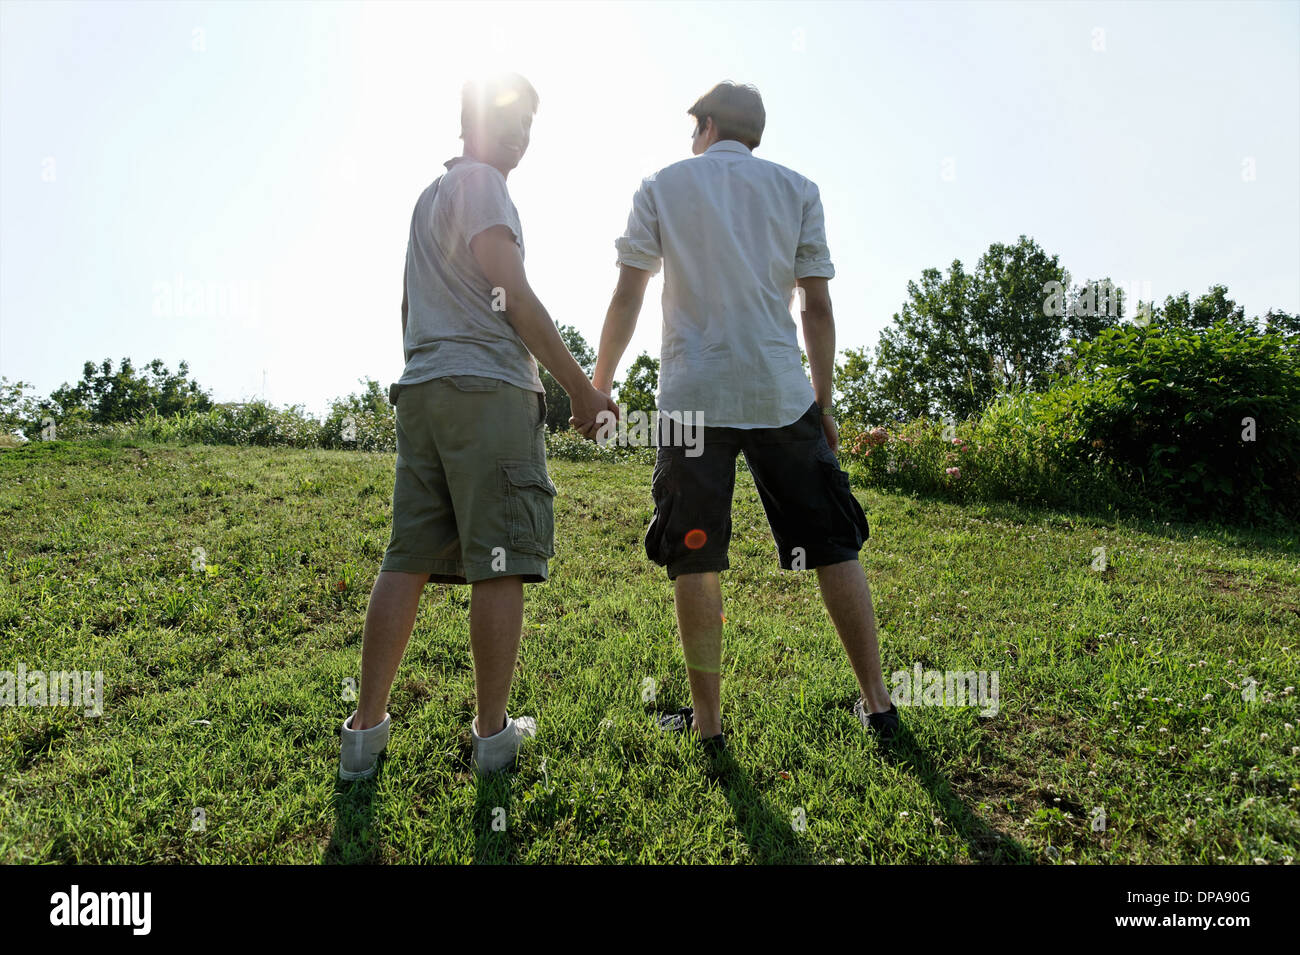 Two young men walking and holding hands Stock Photo